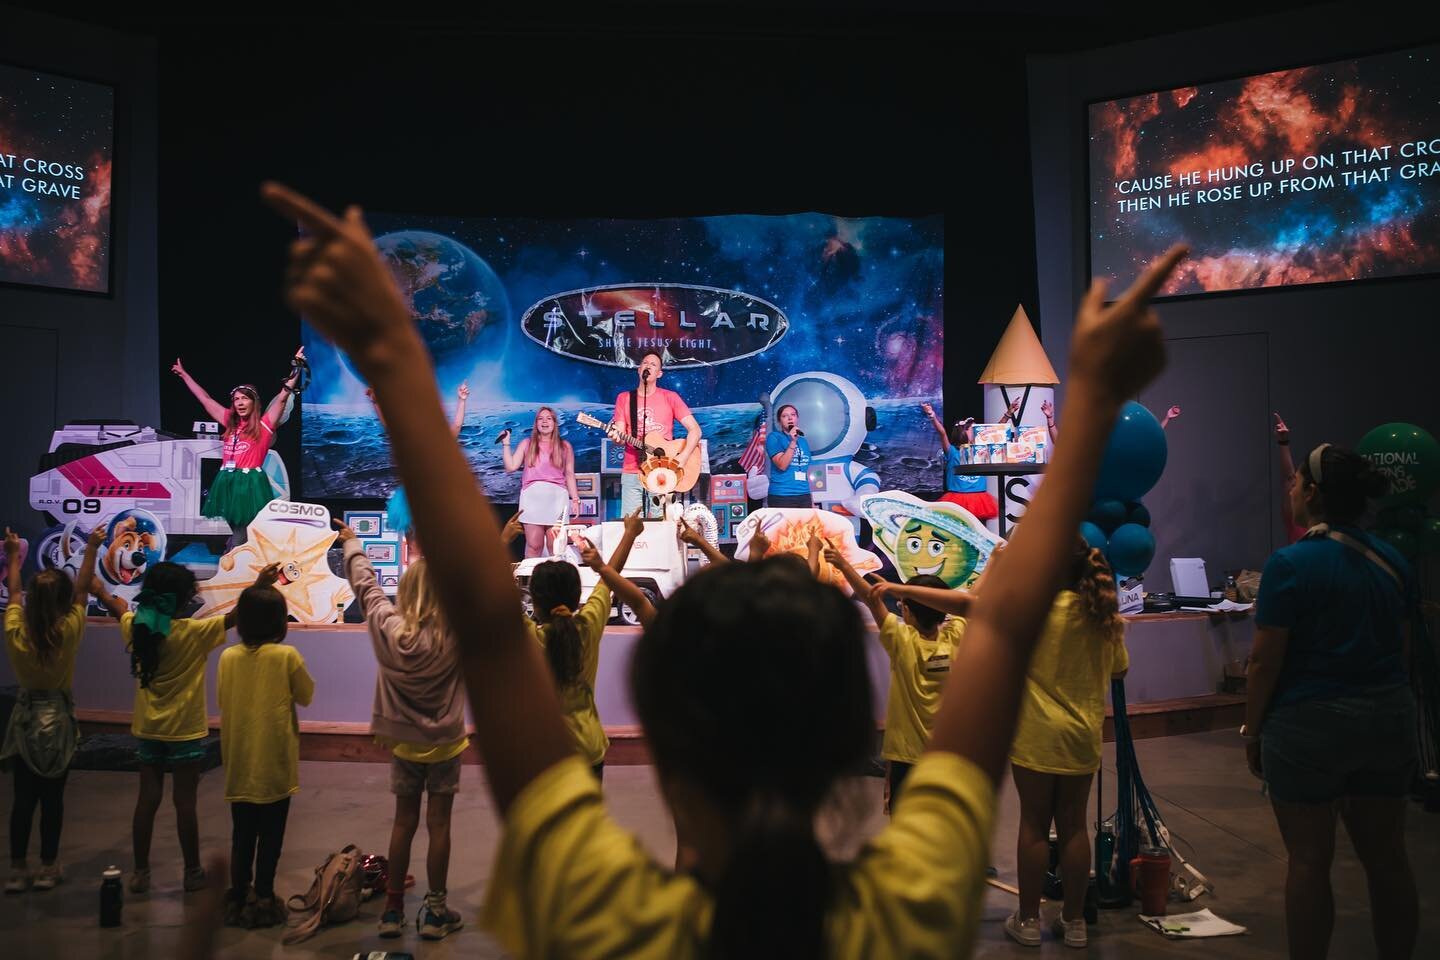 That's a wrap for DAY 4 of VBS 2023. We had another STELLAR day talking about how to Shine Jesus&rsquo; Light!

We hope to see you tonight at 5:30pm for our VBS family fun night here at Redeemer.